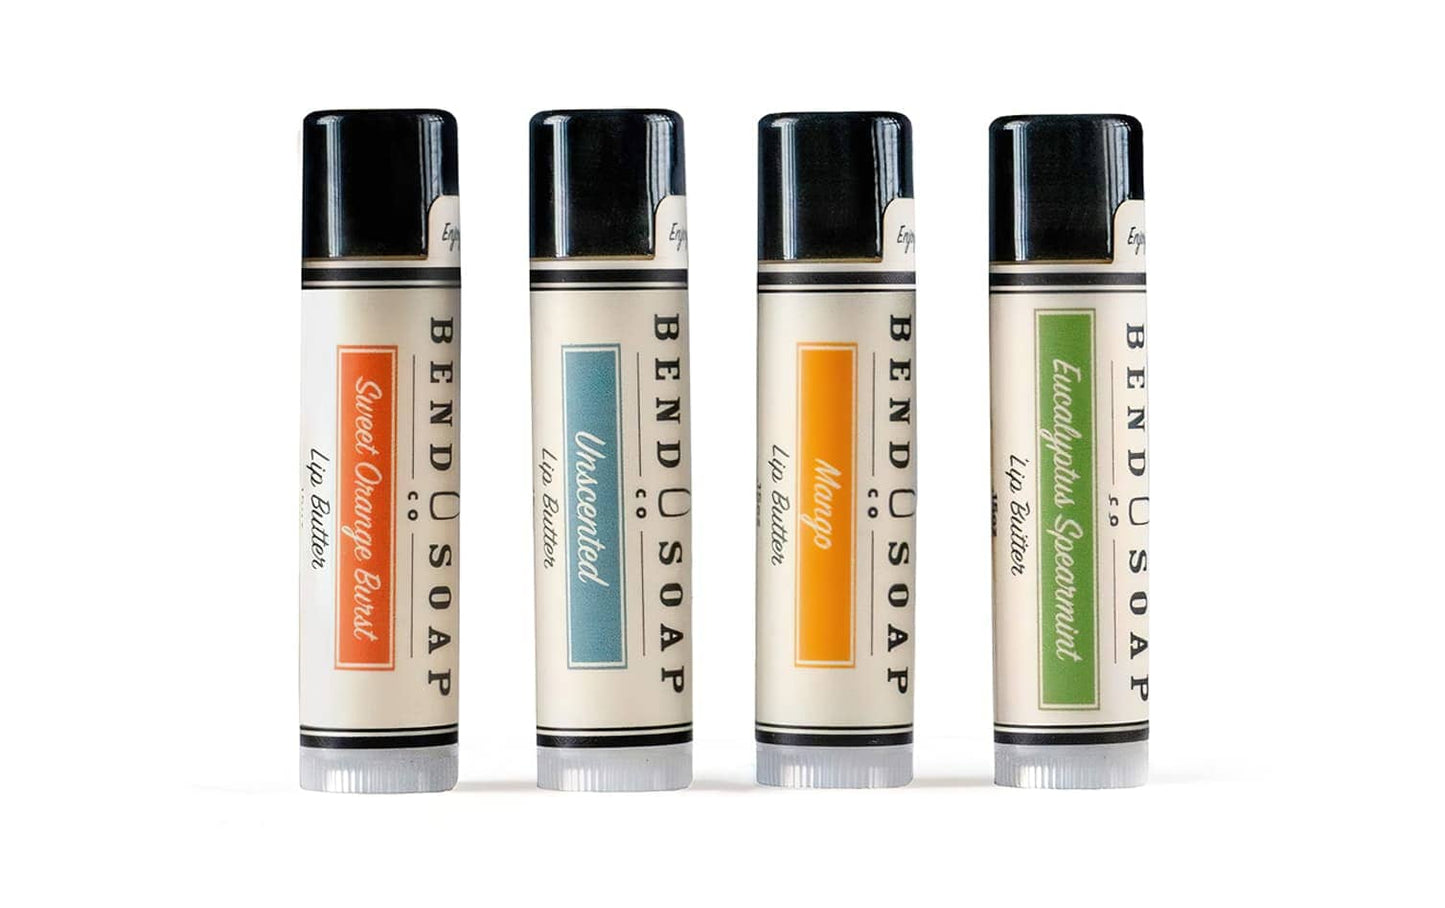 All-Natural Lip Butter Variety Pack With Tubes of Sweet Orange Burst, Unscented, Mango and Eucalyptus Spearmint